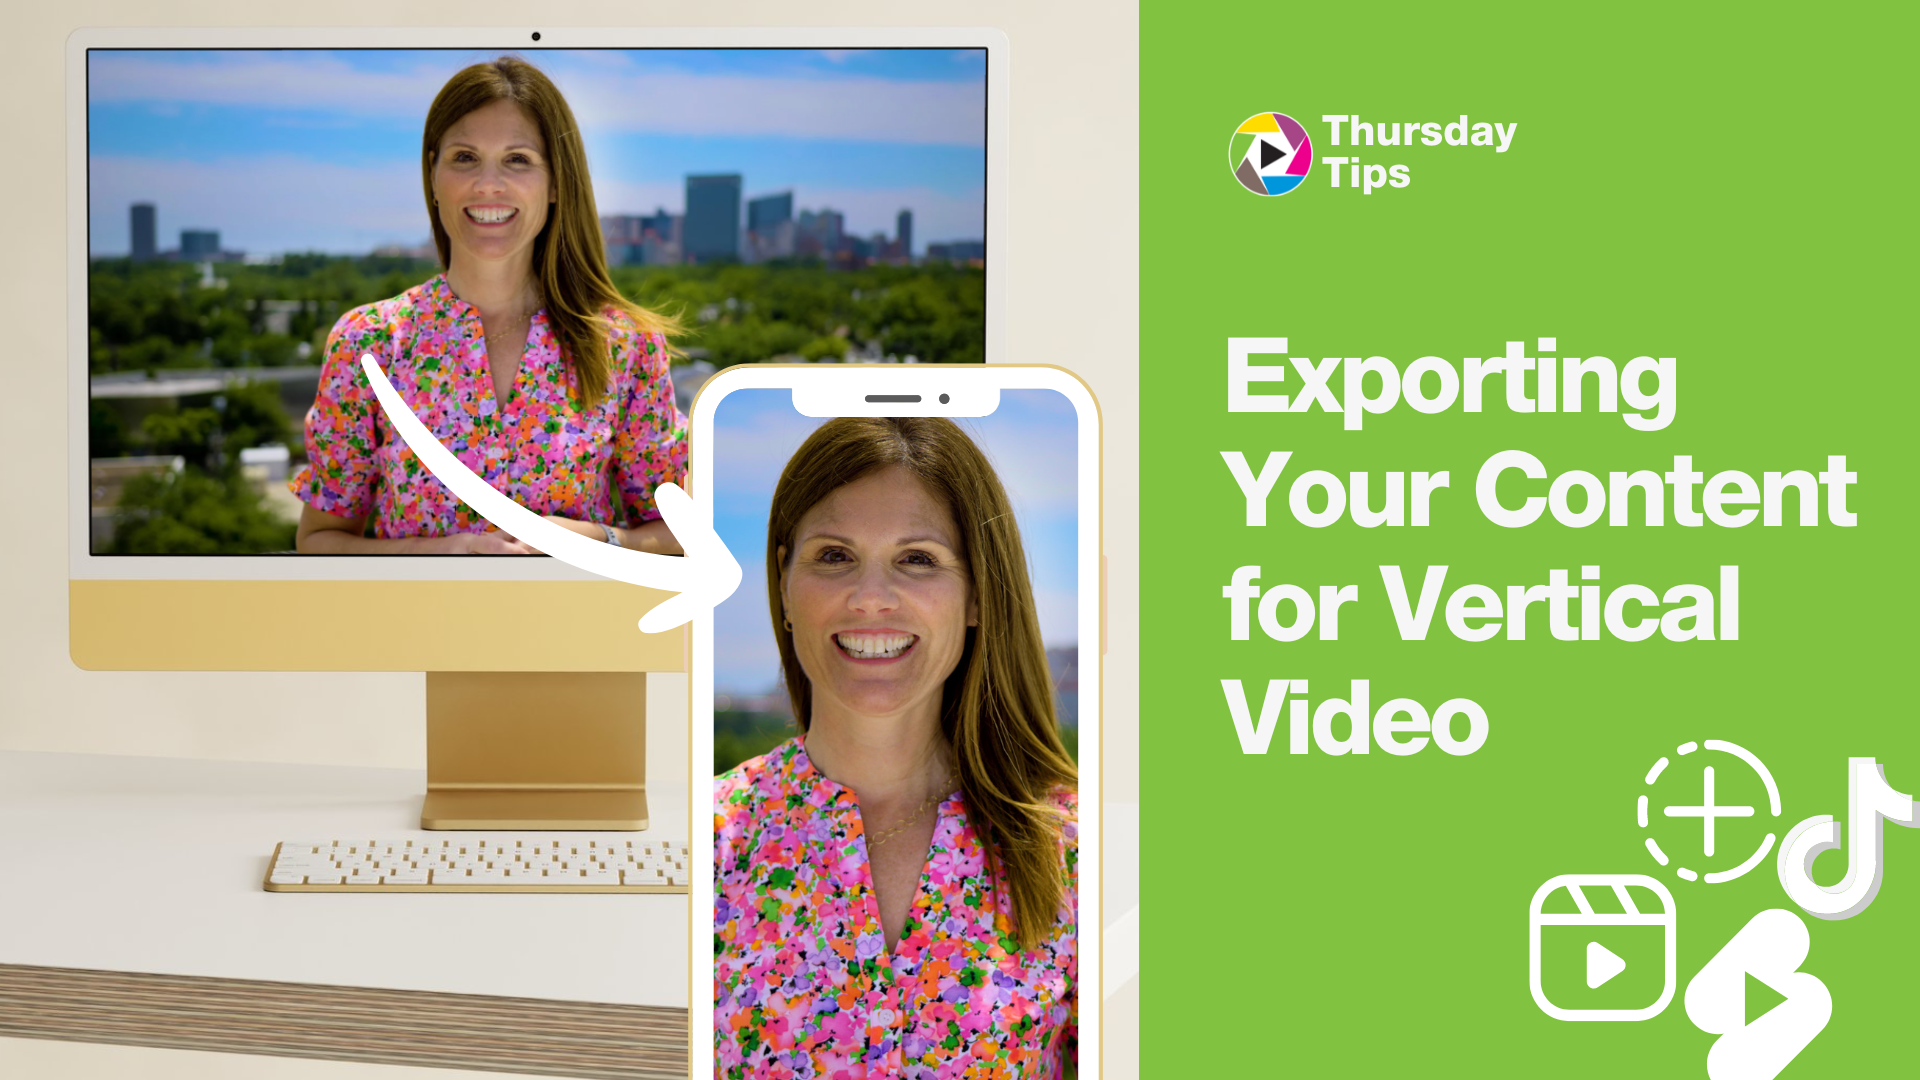 Thursday Tips: Exporting Your Content for Vertical Video